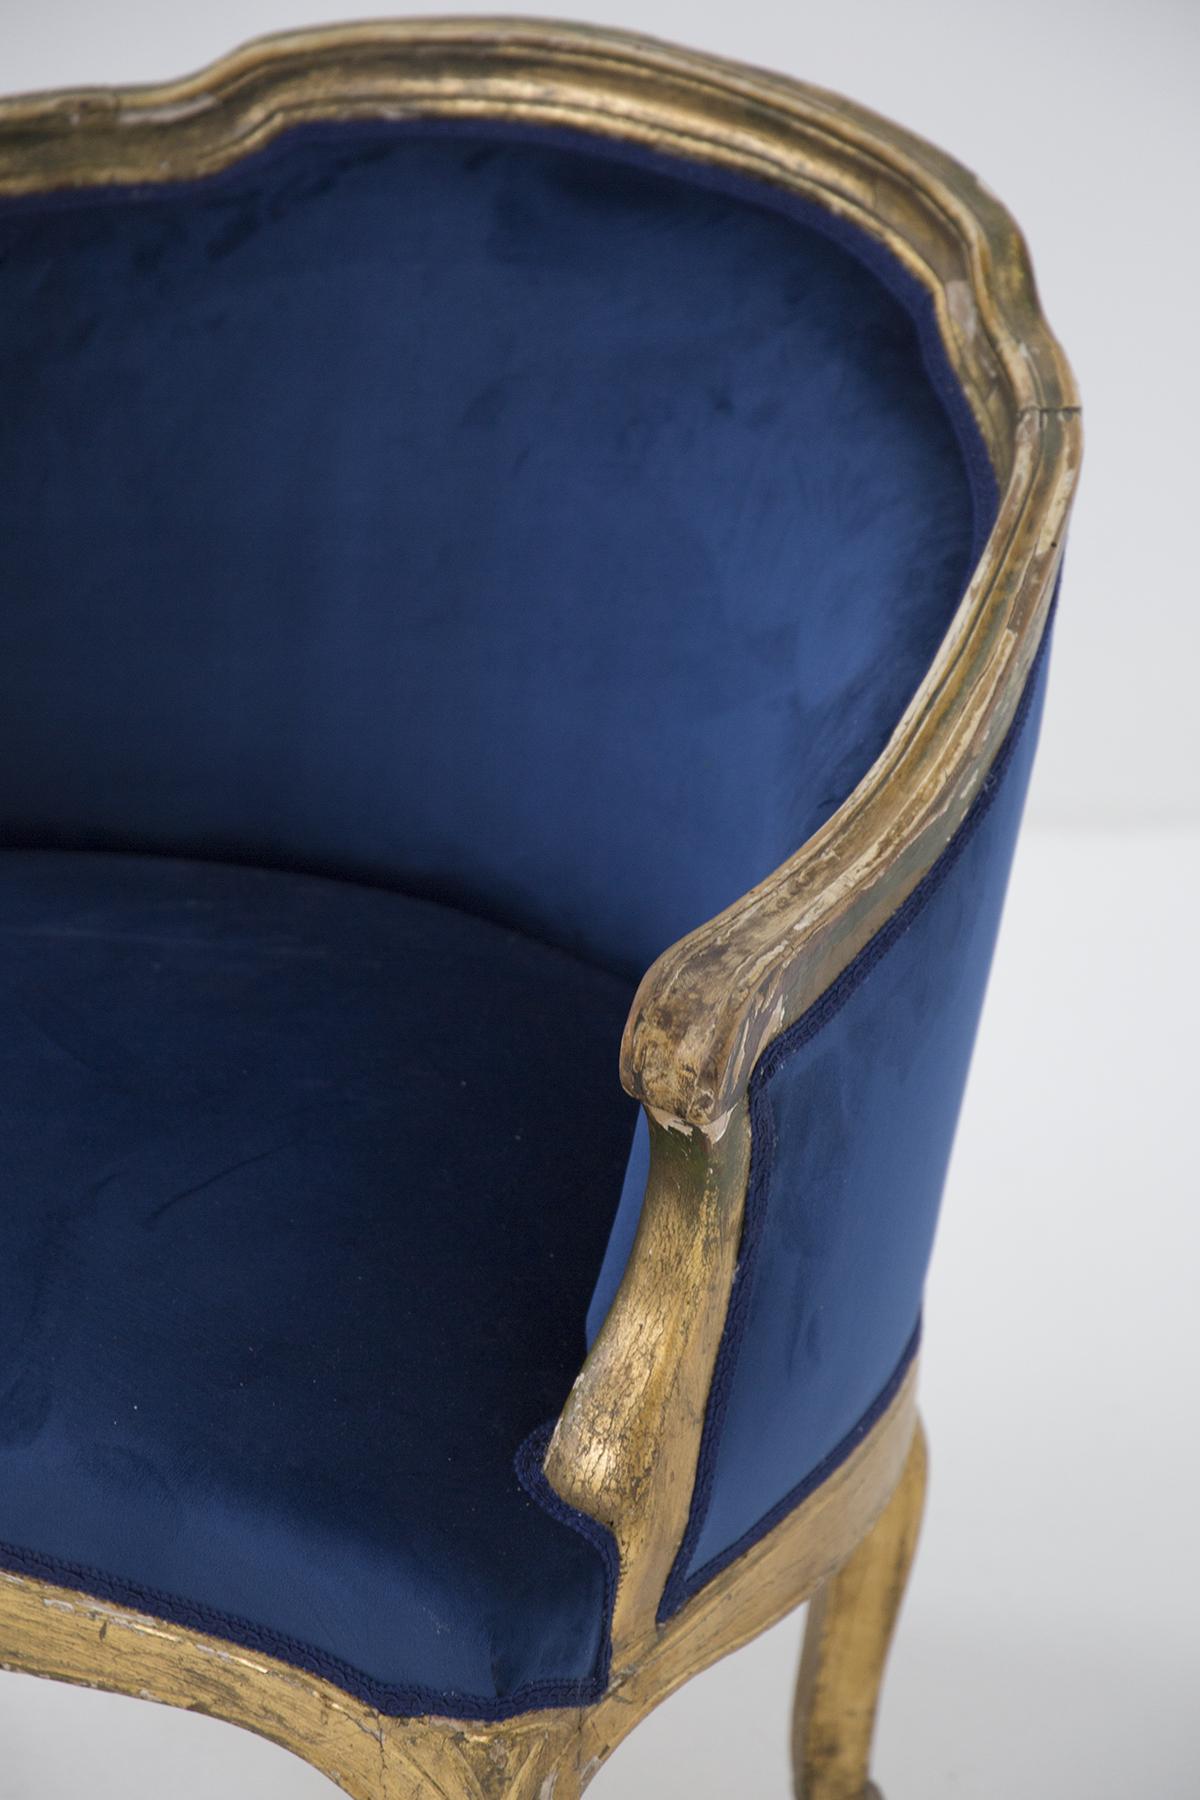 Eccentric antique giltwood and velvet armchair from the late 1800s and early 1900s, fine Italian manufacture.
The armchair has a frame made entirely of curved gilt wood, very elegant and very pompous.
The shapes are very sinuous, 4 curved legs